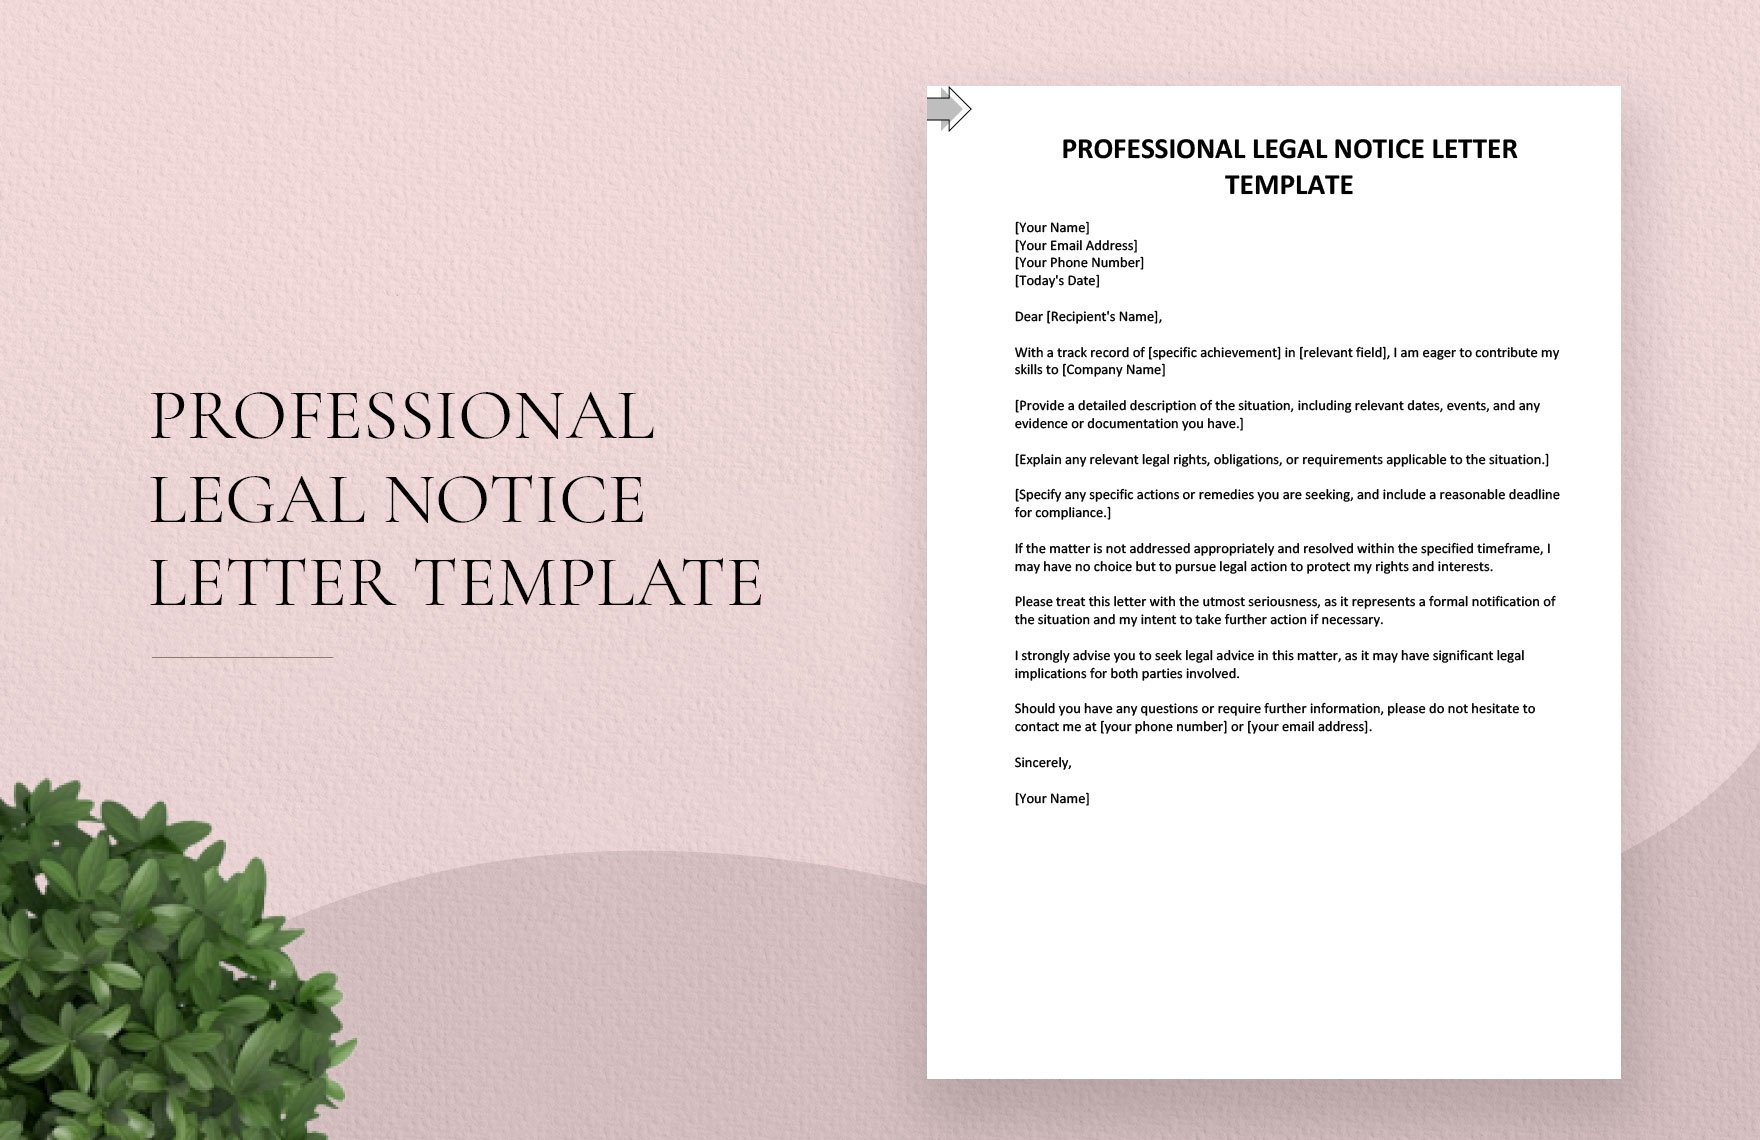 Free Professional Legal Notice Letter Template